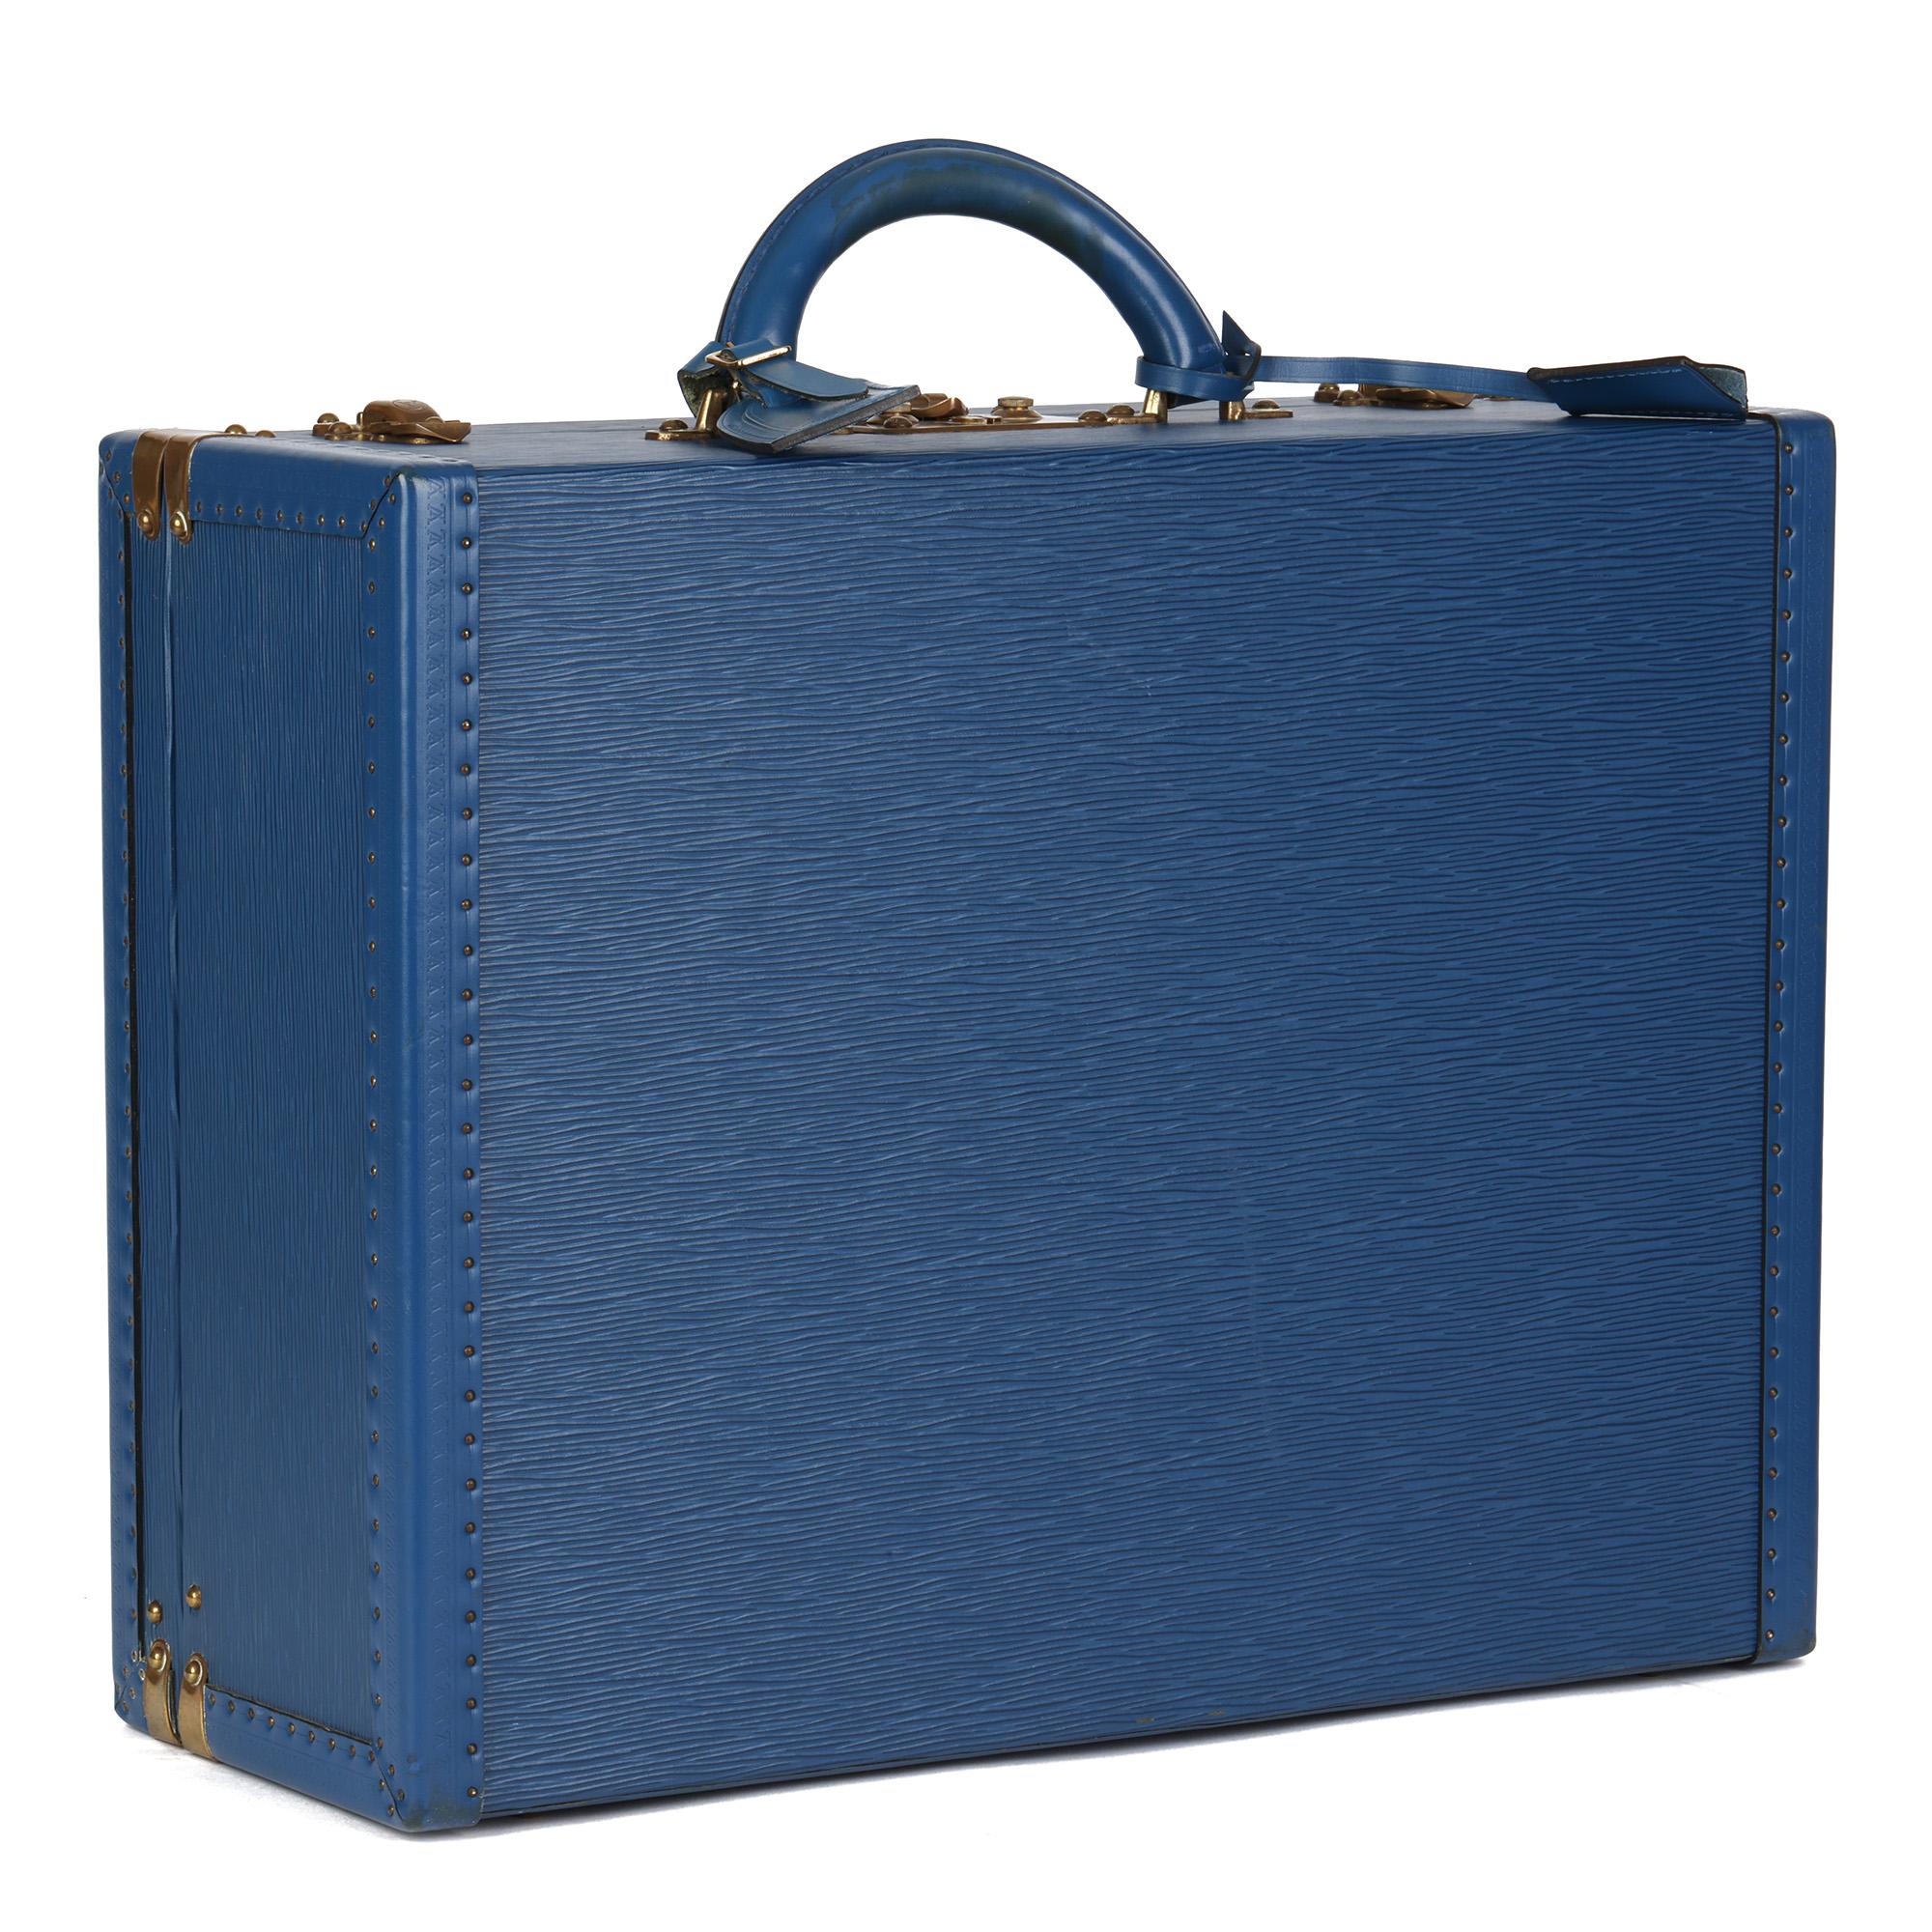 LOUIS VUITTON
Blue Epi Leather Special Order Super President

Xupes Reference: CB578
Serial Number: 1043454
Age (Circa): 2000
Accompanied By: Louis Vuitton Dust Bag, Luggage Tag, Clochette
Authenticity Details: Date Stamp (Made in France)
Gender: